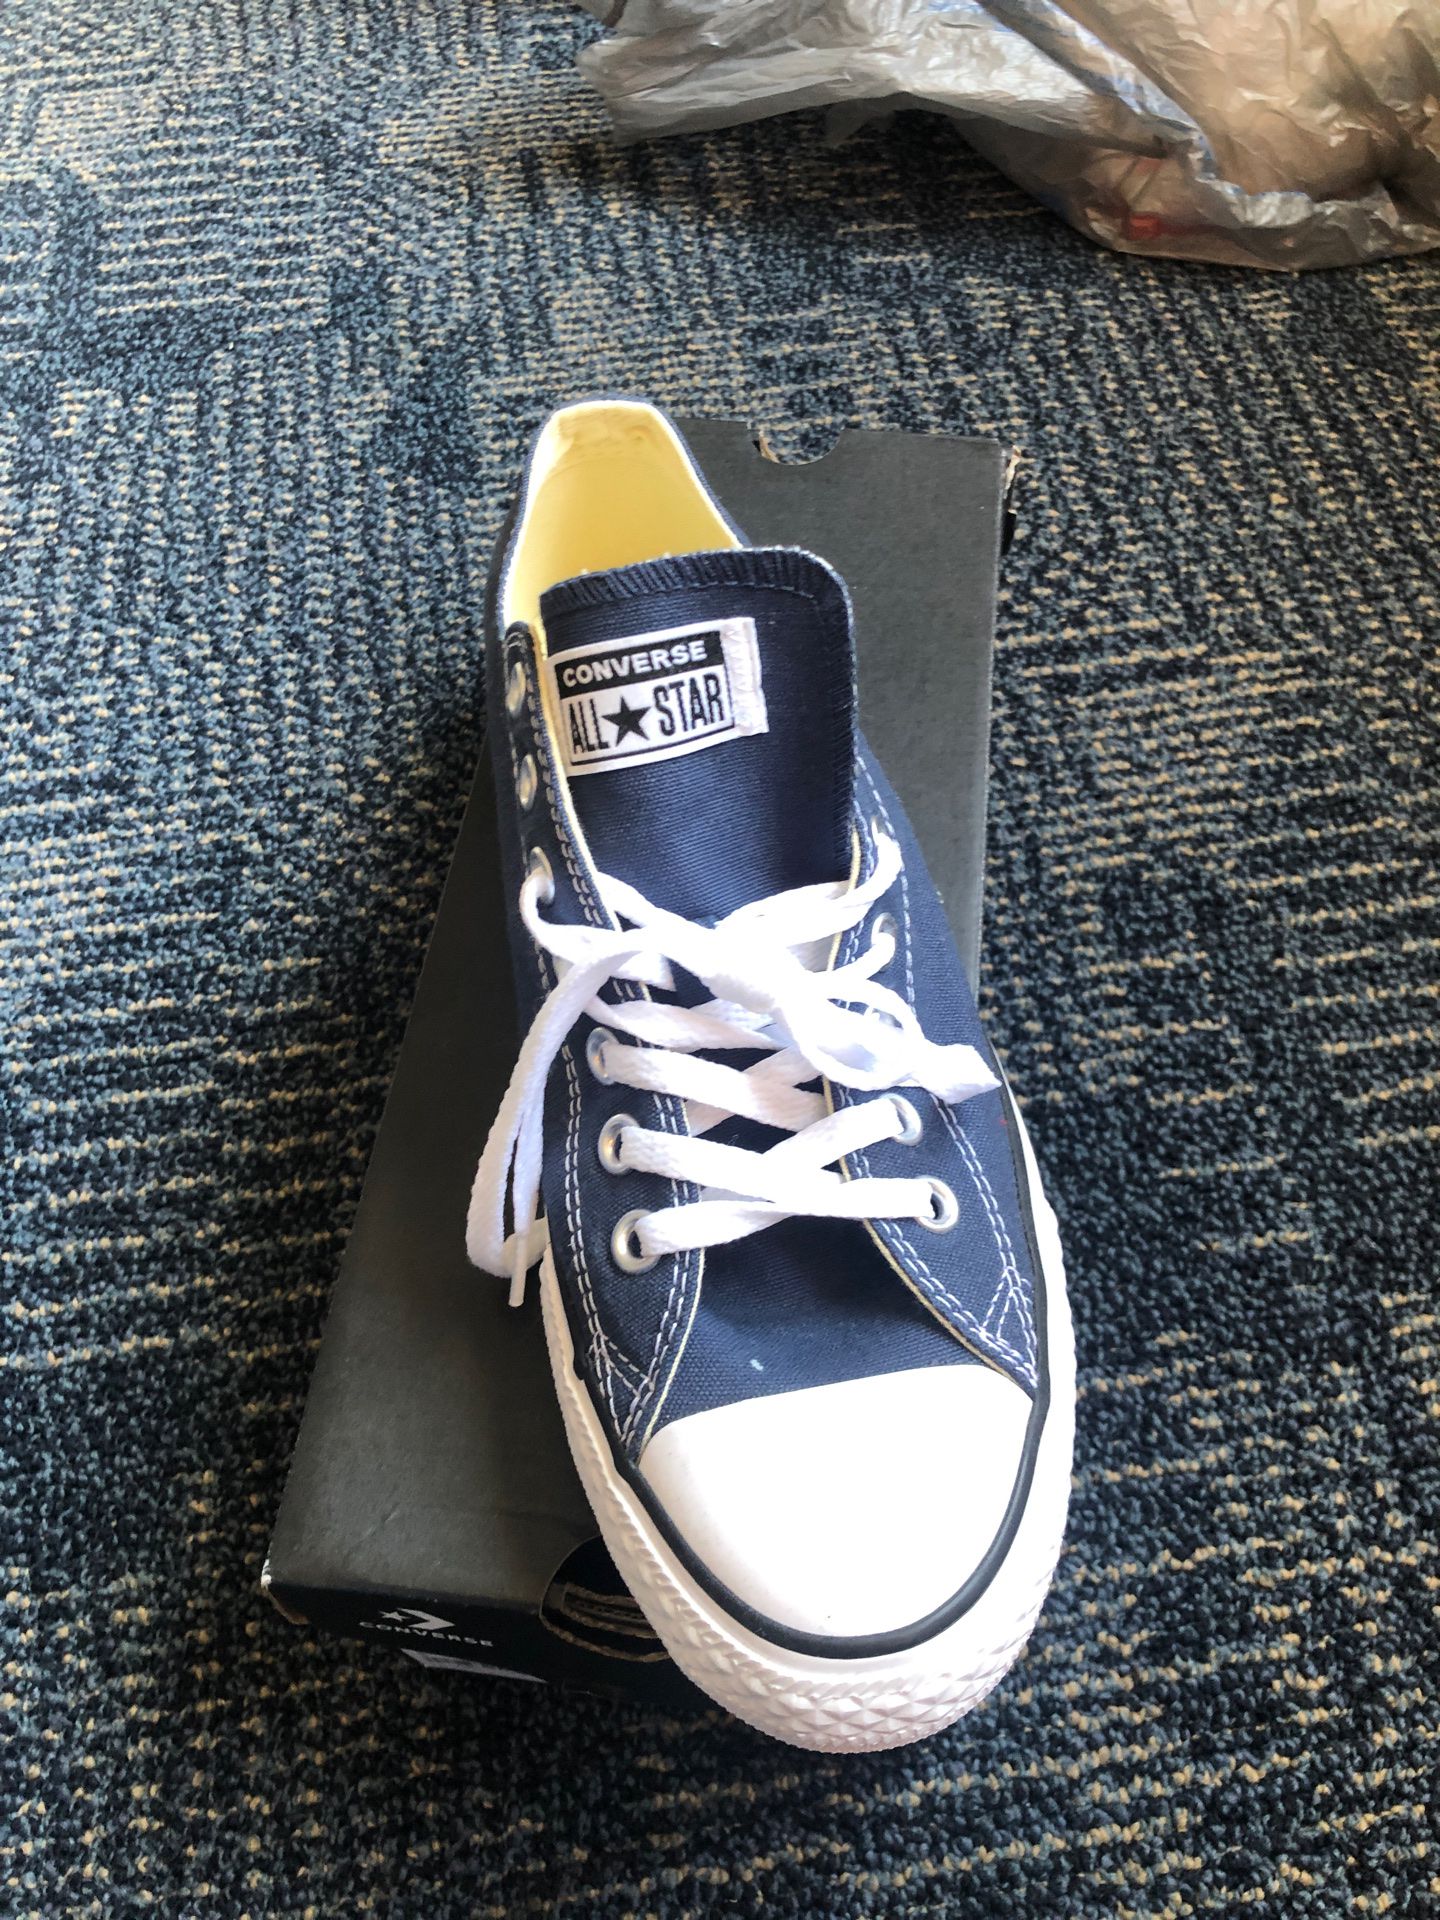 Converse Blue and White Brand New!!!!